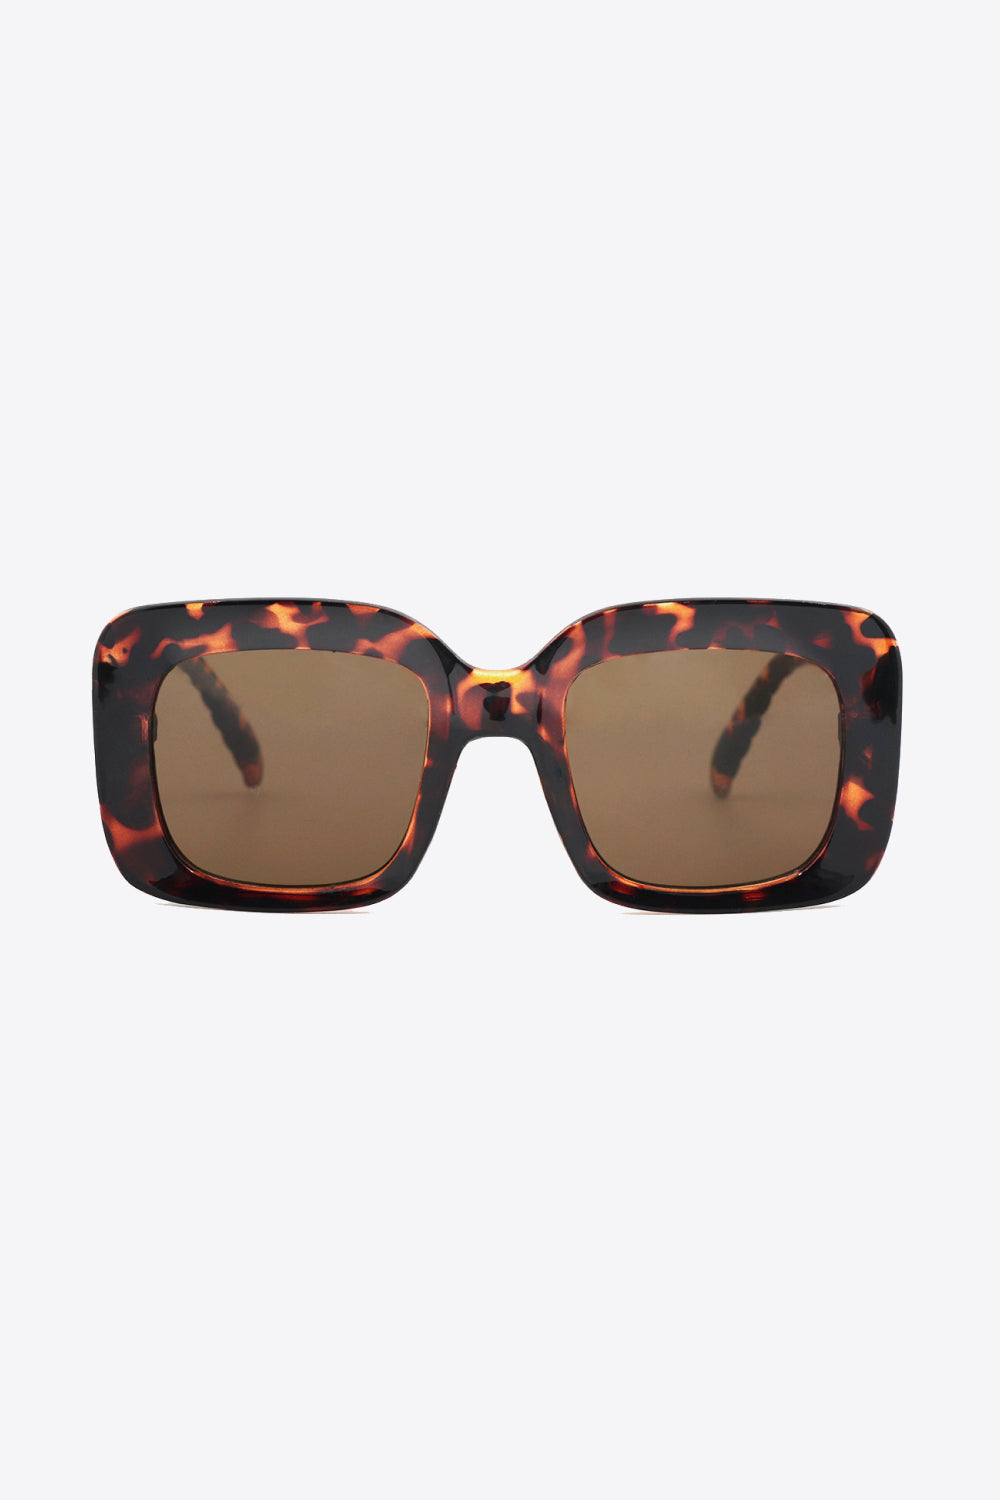 Square Polycarbonate UV400 Sunglasses - Online Only